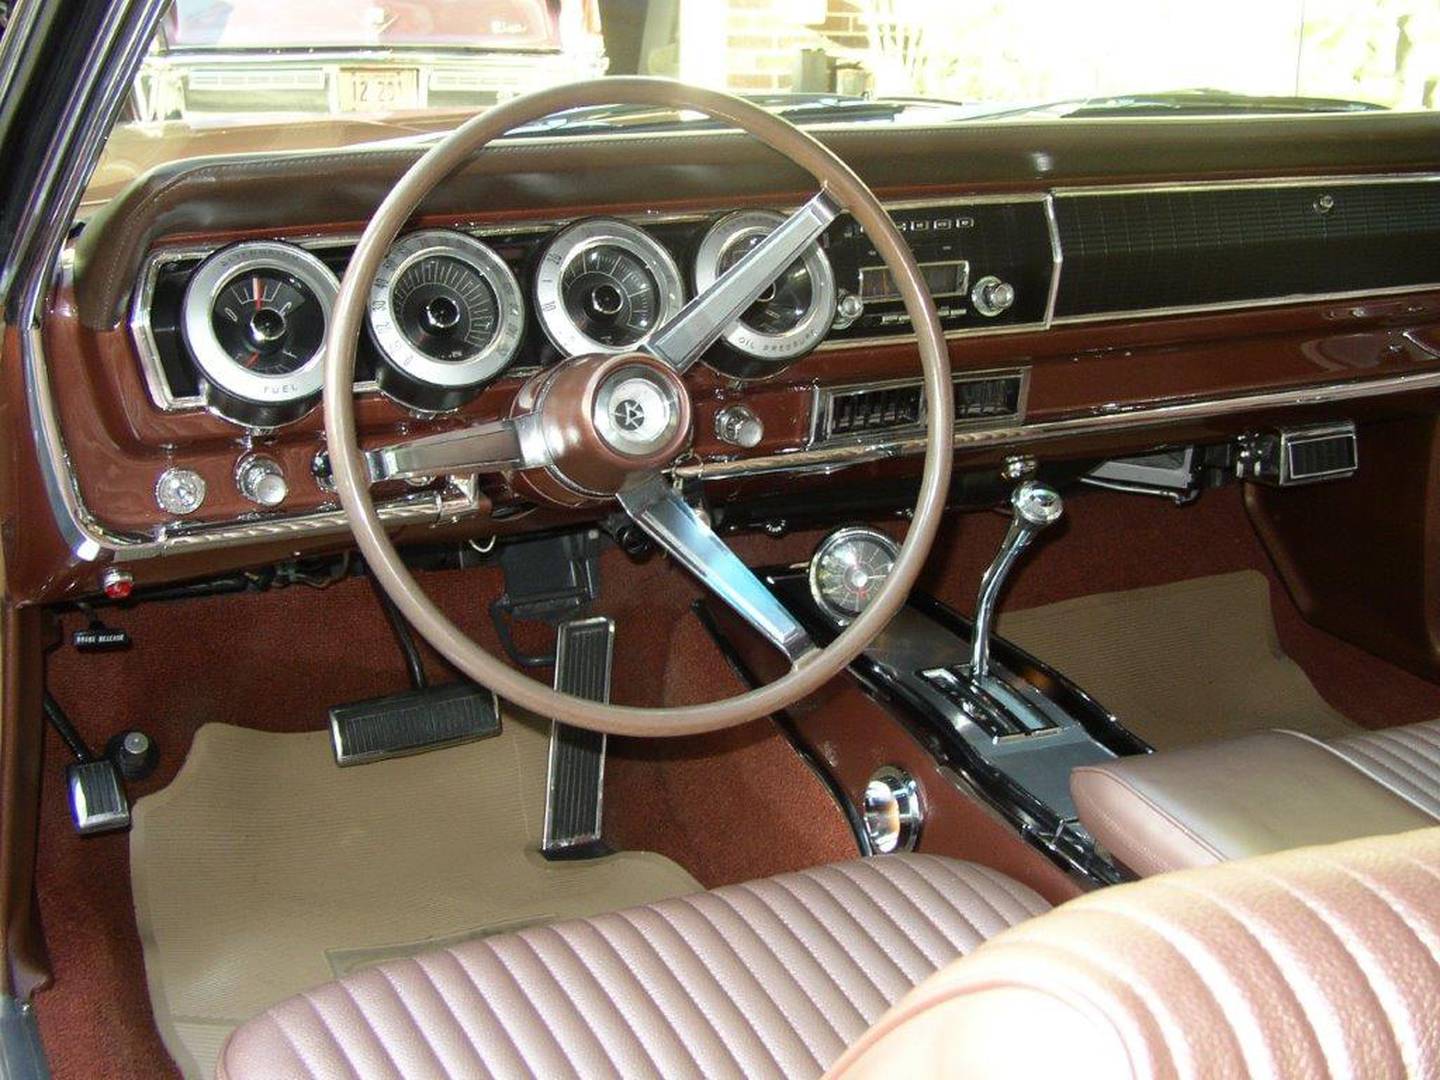 Photos by Steve Rubens - 1967 Dodge Charger Dash